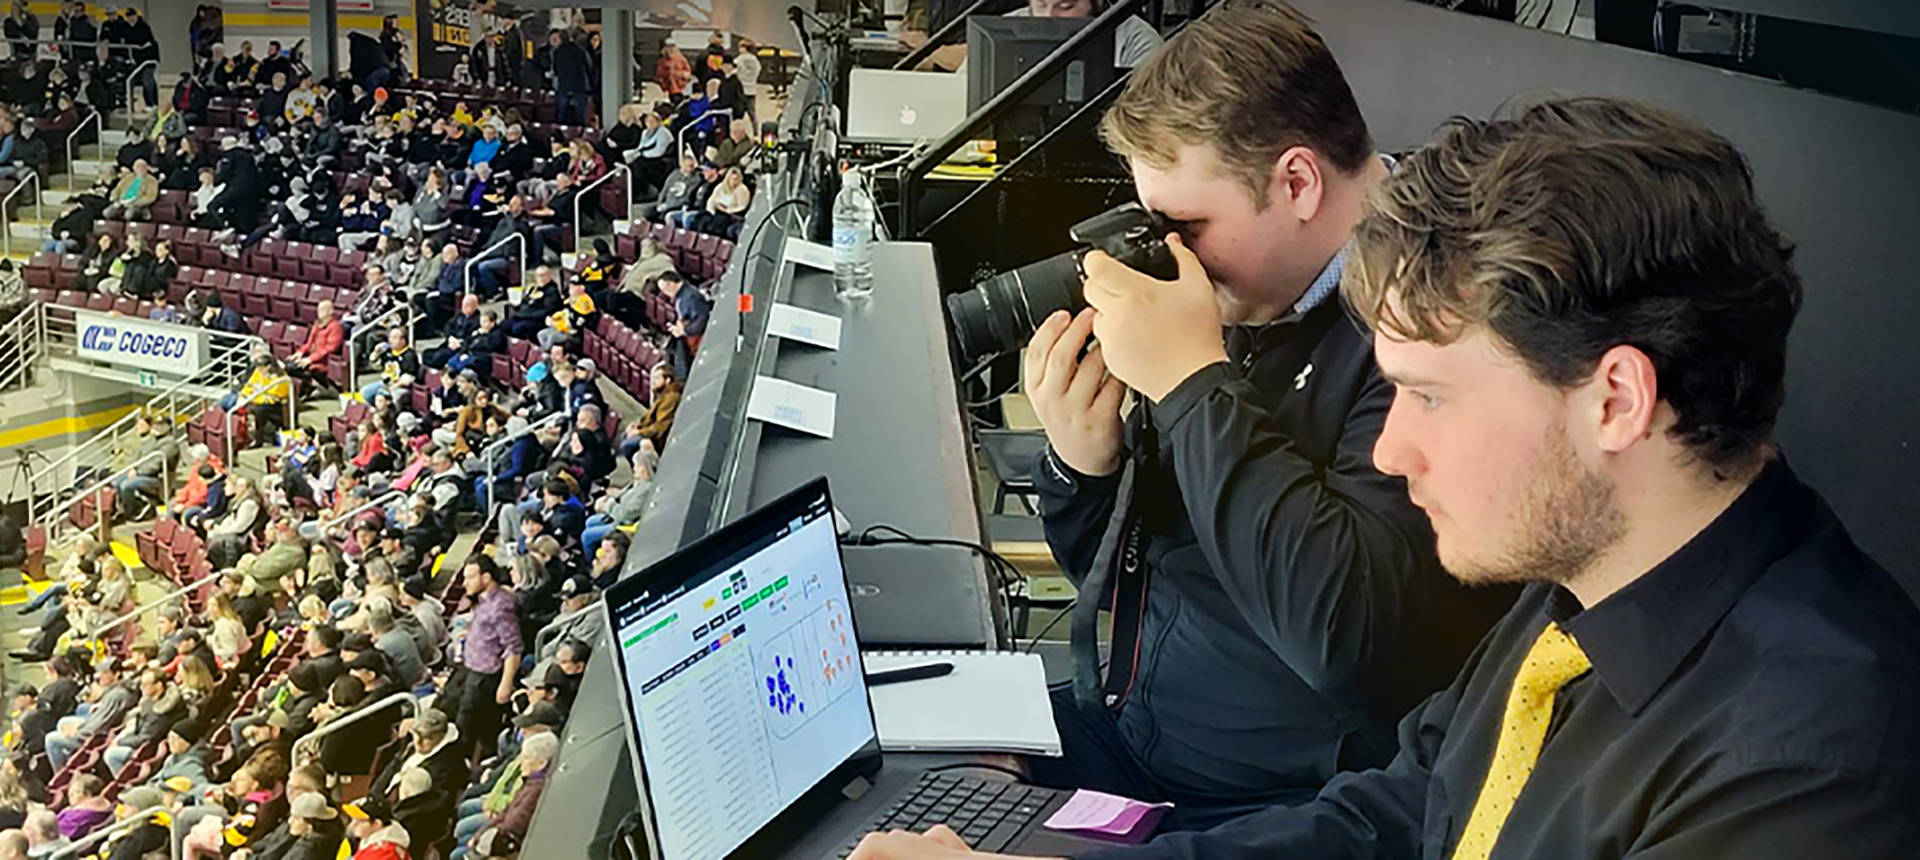 Two white men analyzing data and taking photos at a hockey game